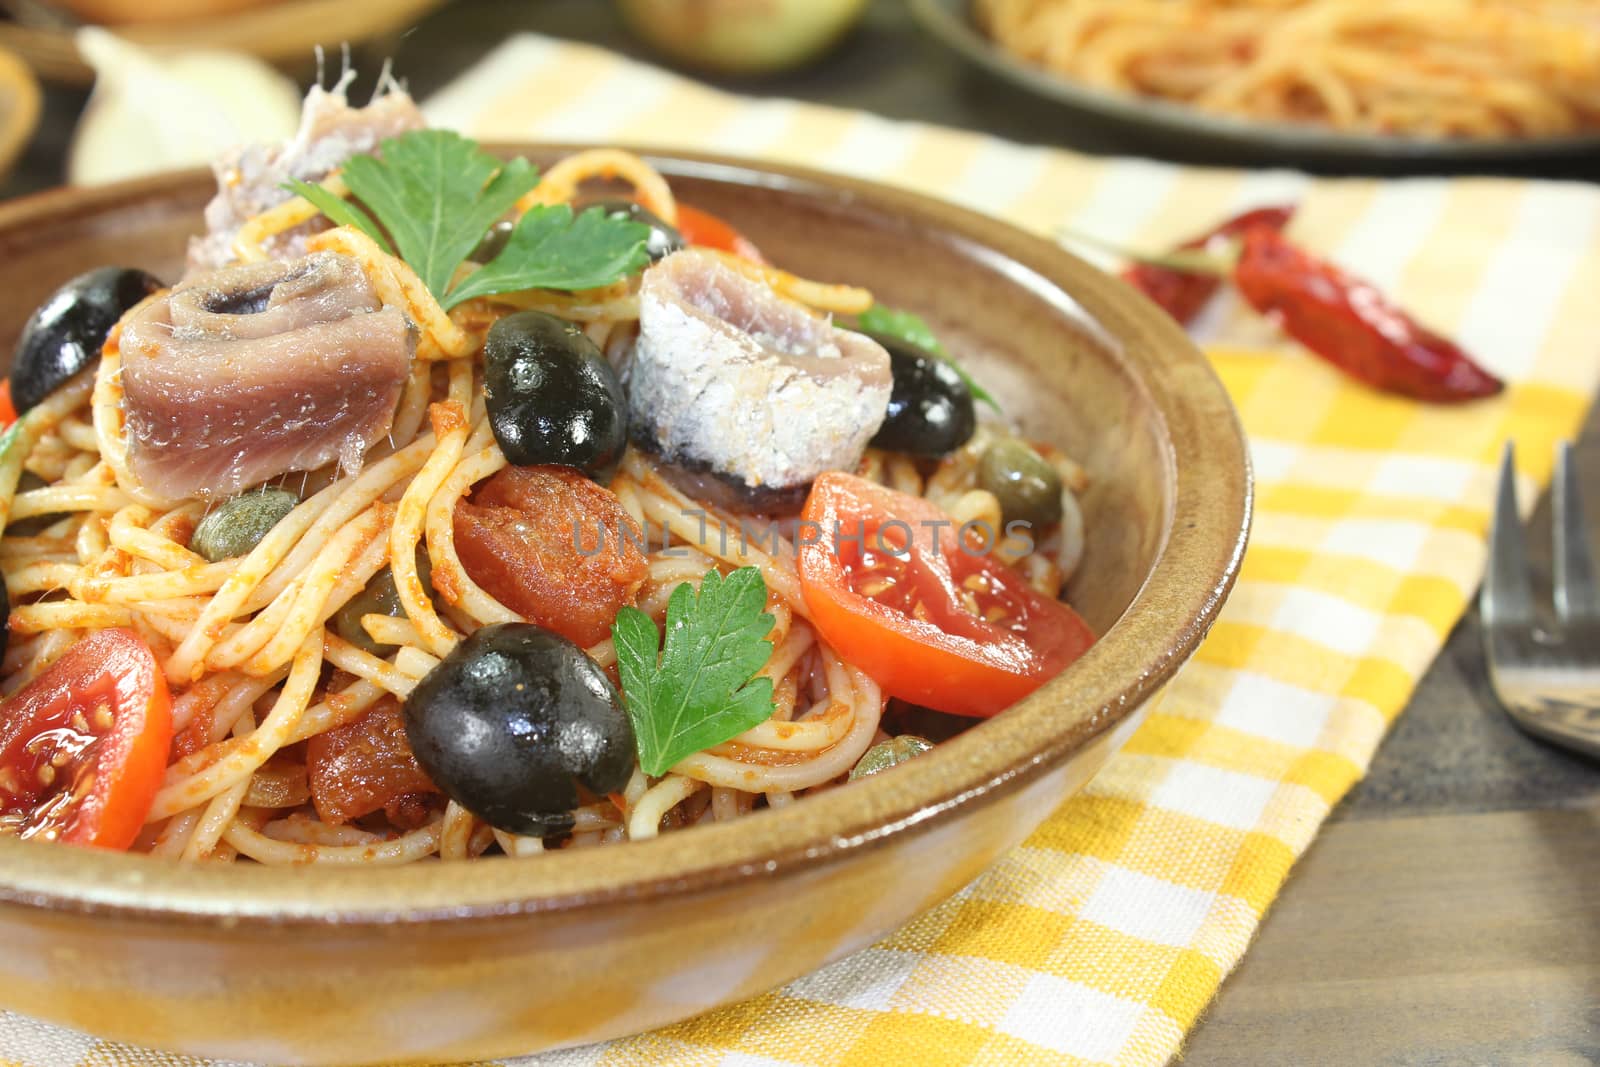 Spaghetti alla puttanesca with olives and tomatoes on a napkin